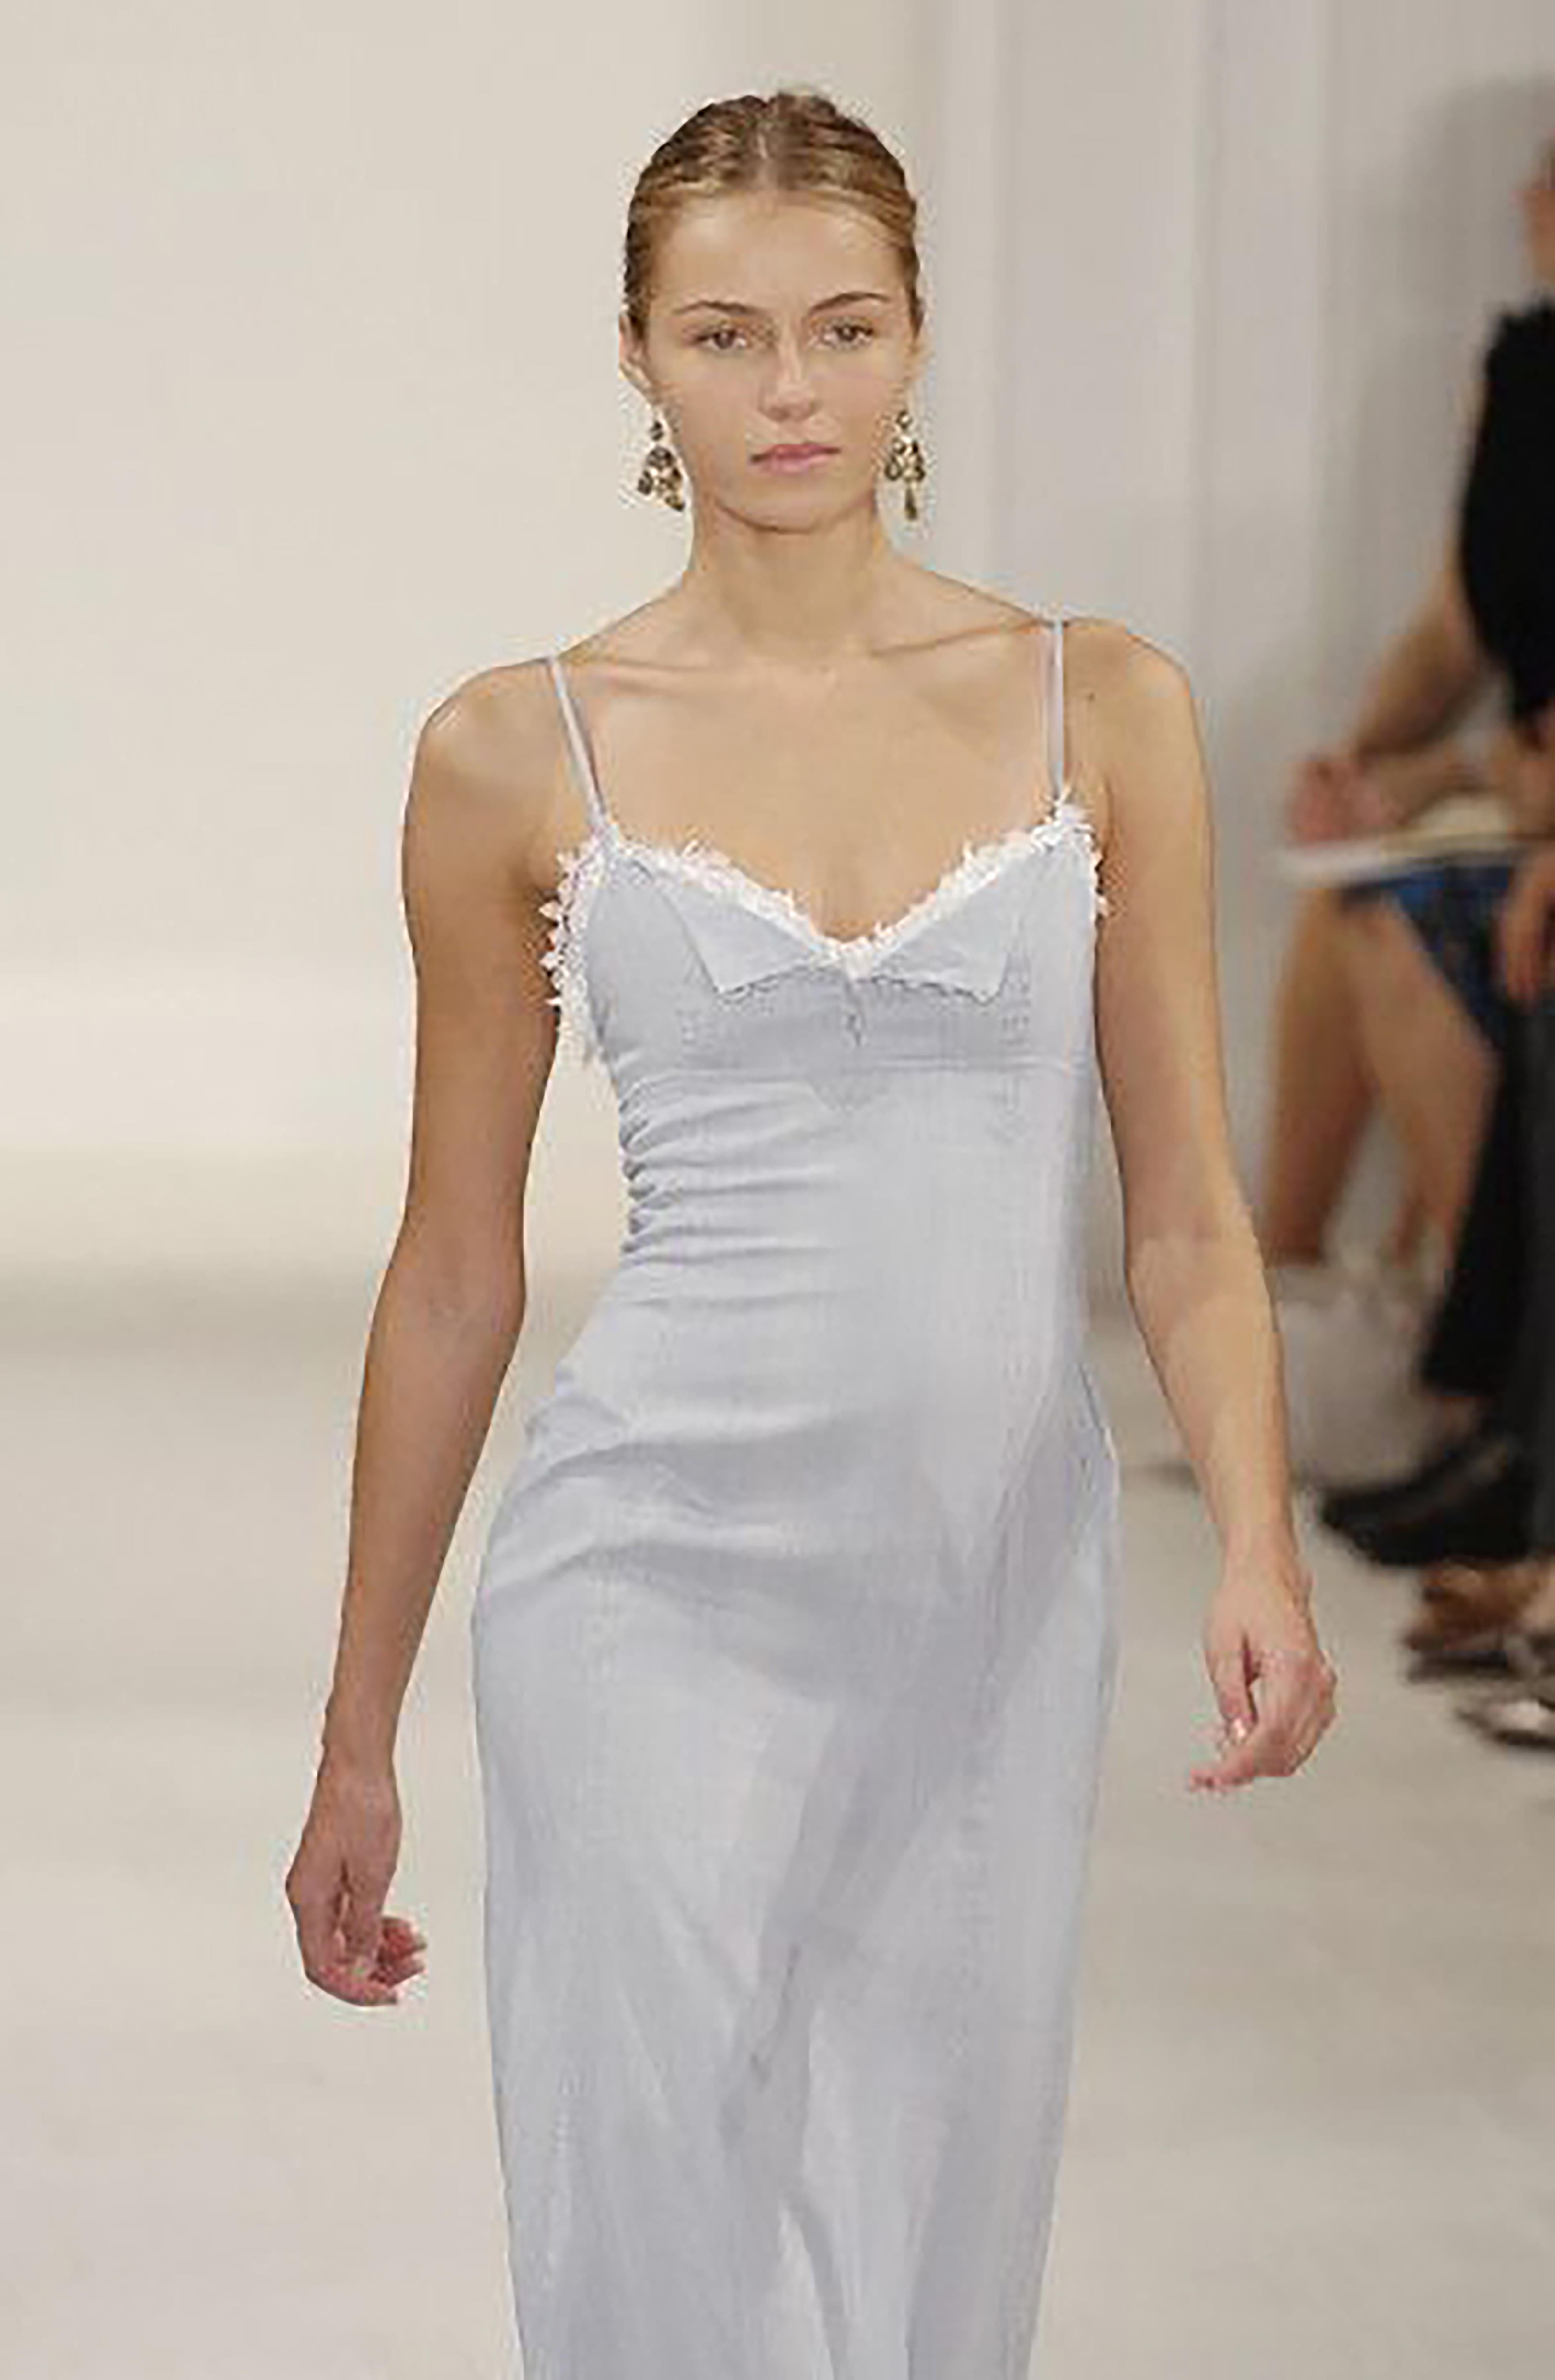 S/S 2006 Ralph Lauren Pinstriped Blue and White Lace Trim Gown 3